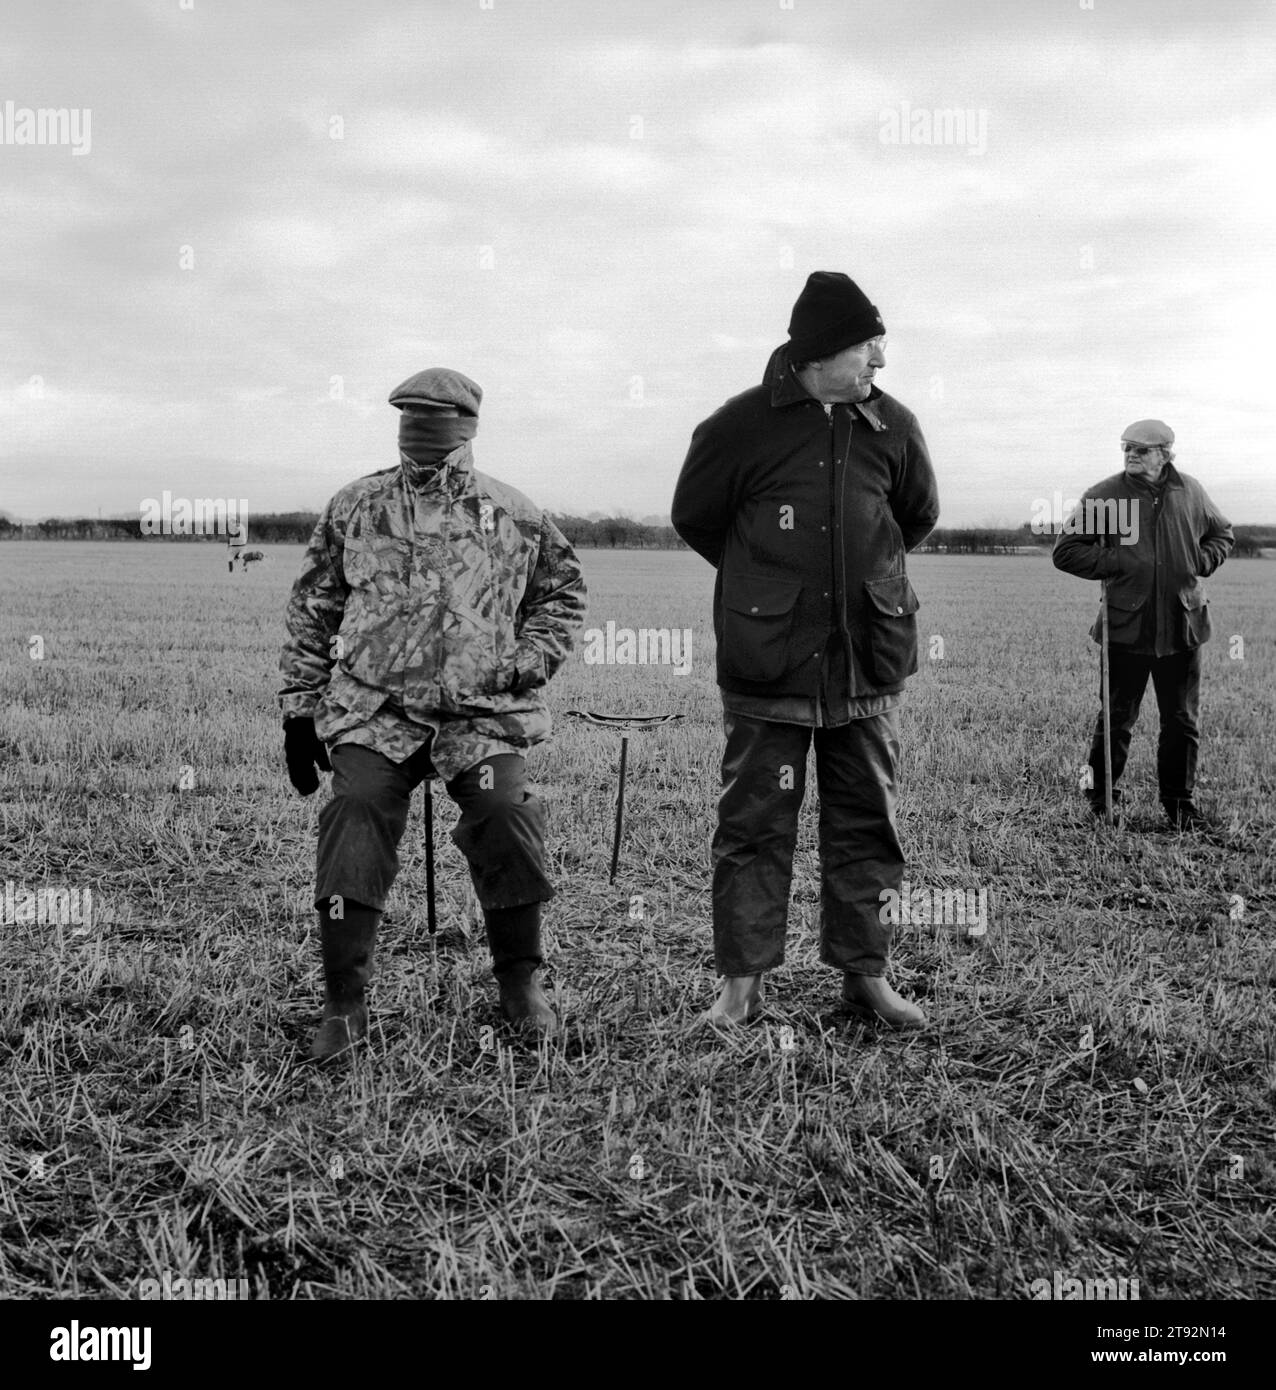 Hare Coursing 2000s UK. On a bitterly cold February day members of the Swaffham Coursing Club meet near Narborough, Norfolk, England 2000s HOMER SYKES Stock Photo